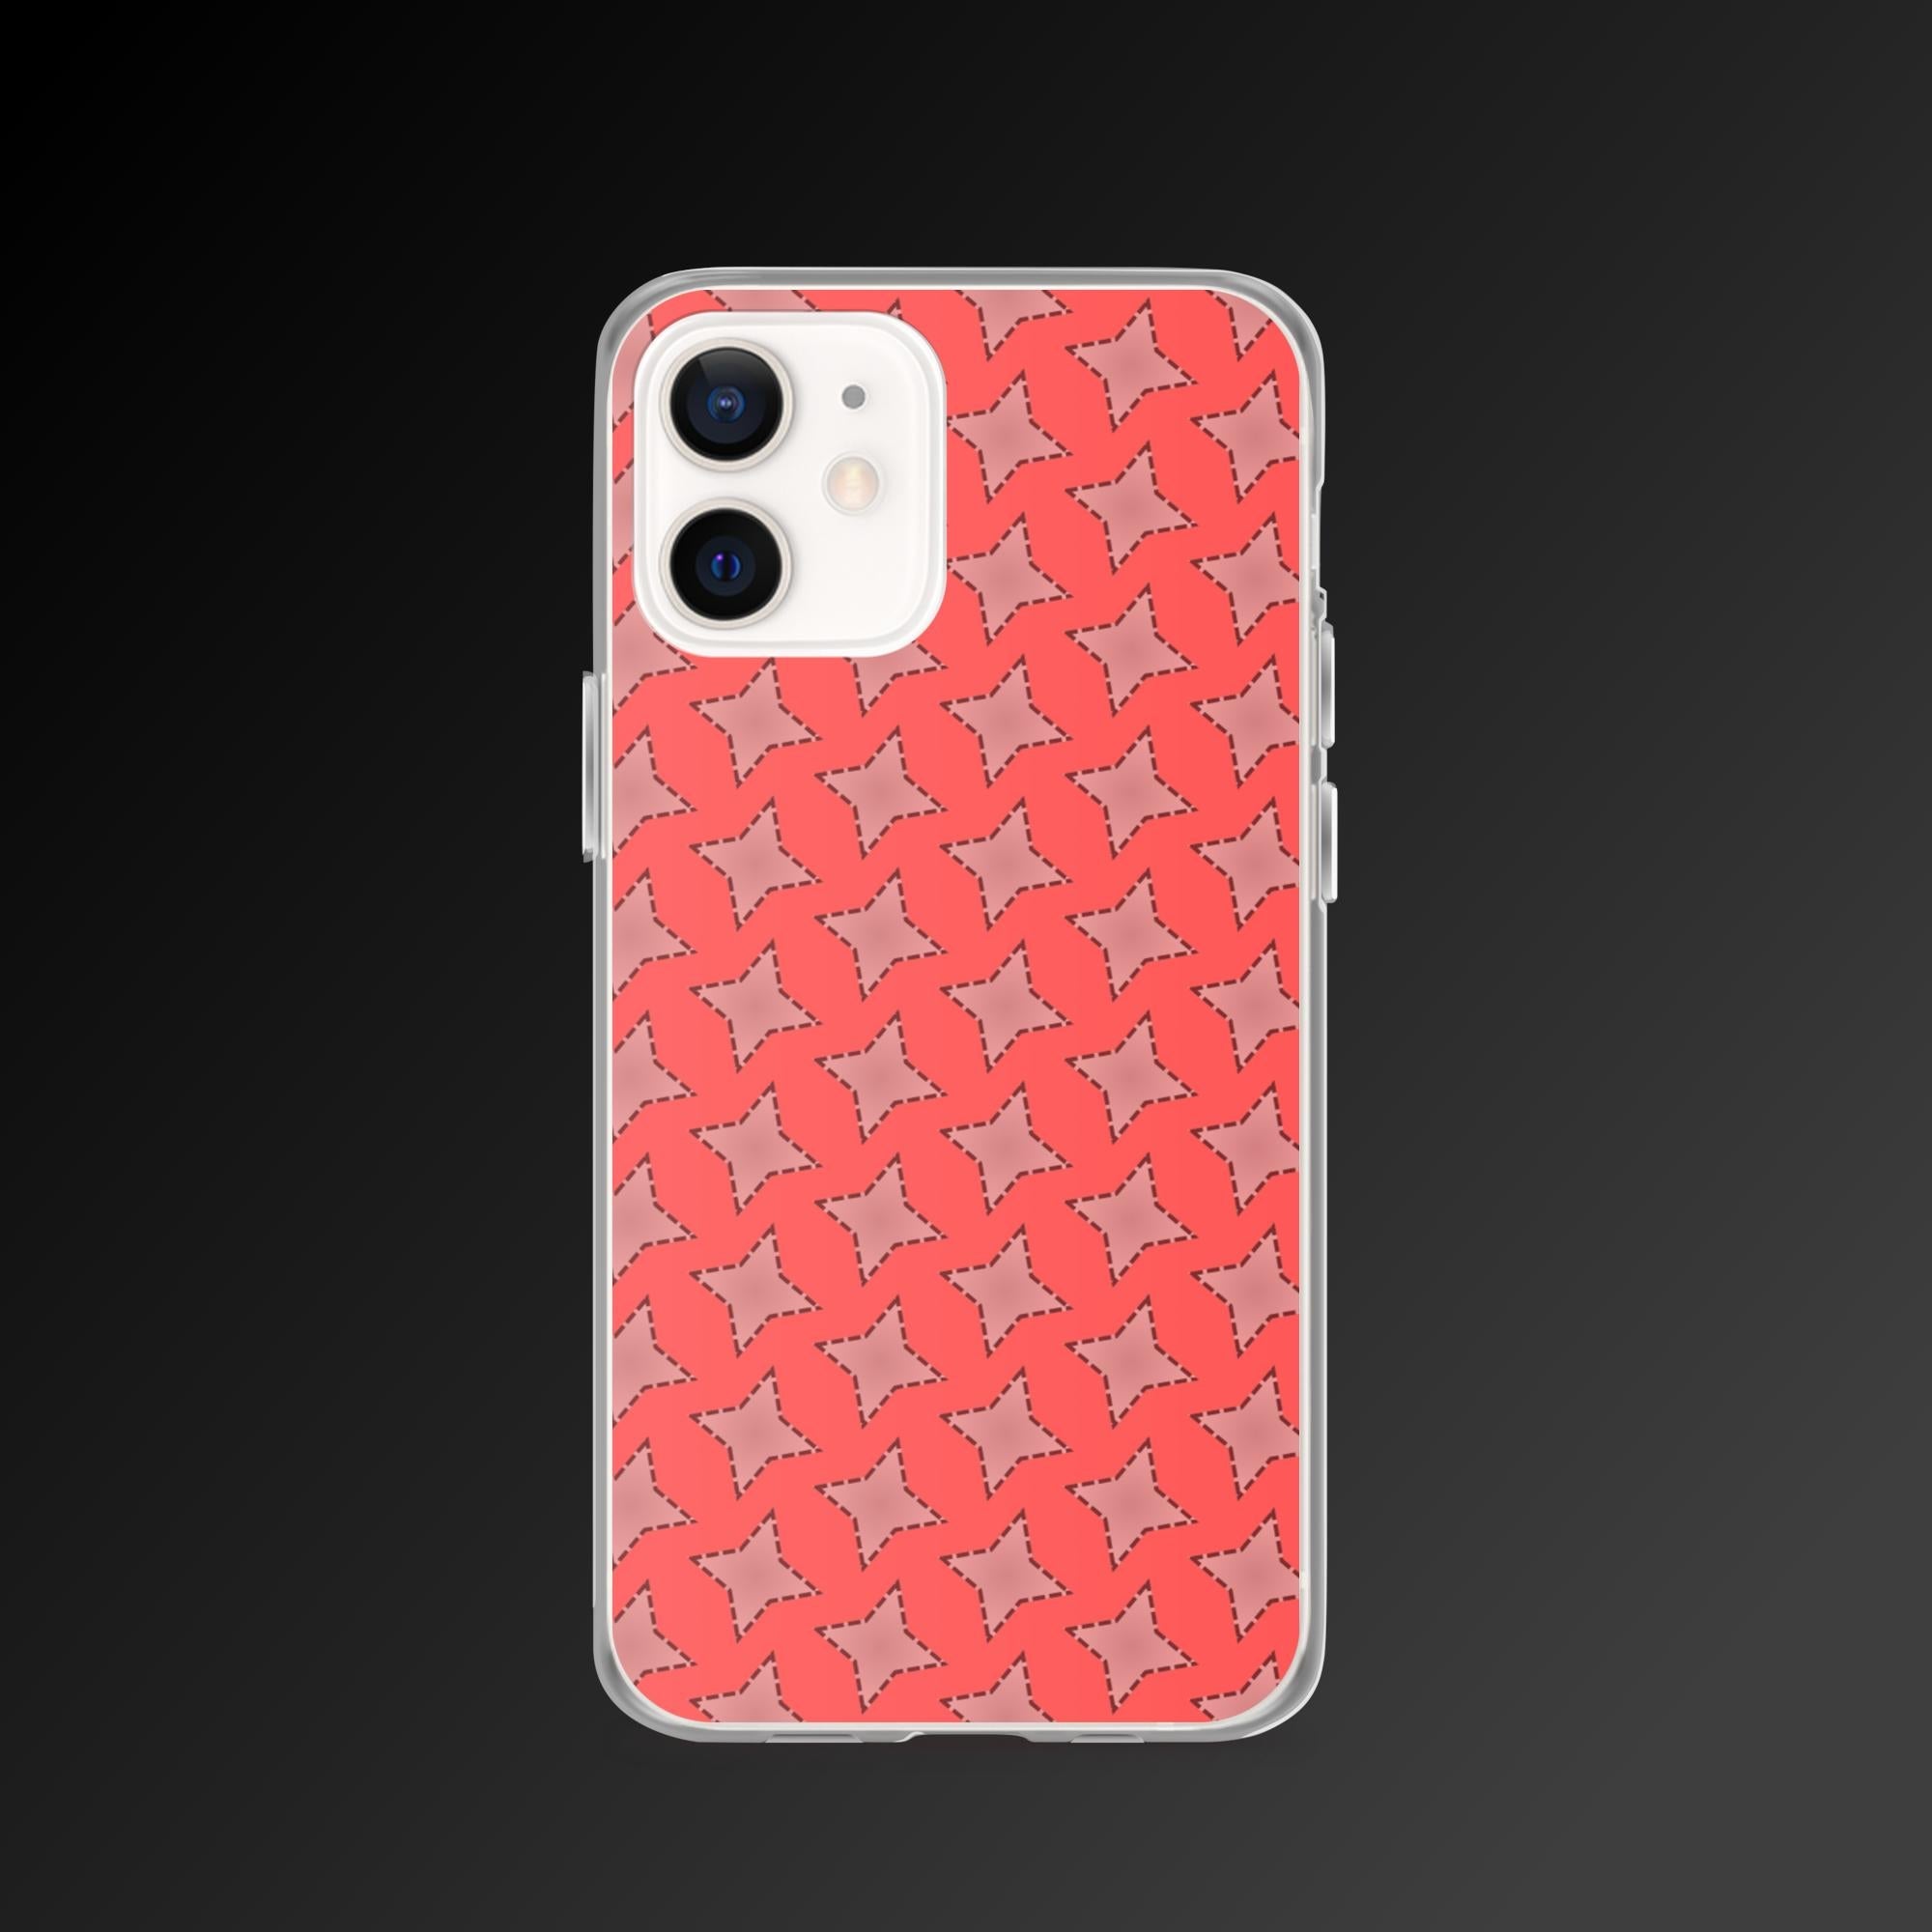 "Ninja star pattern" clear iphone case - Clear iphone case - Ever colorful